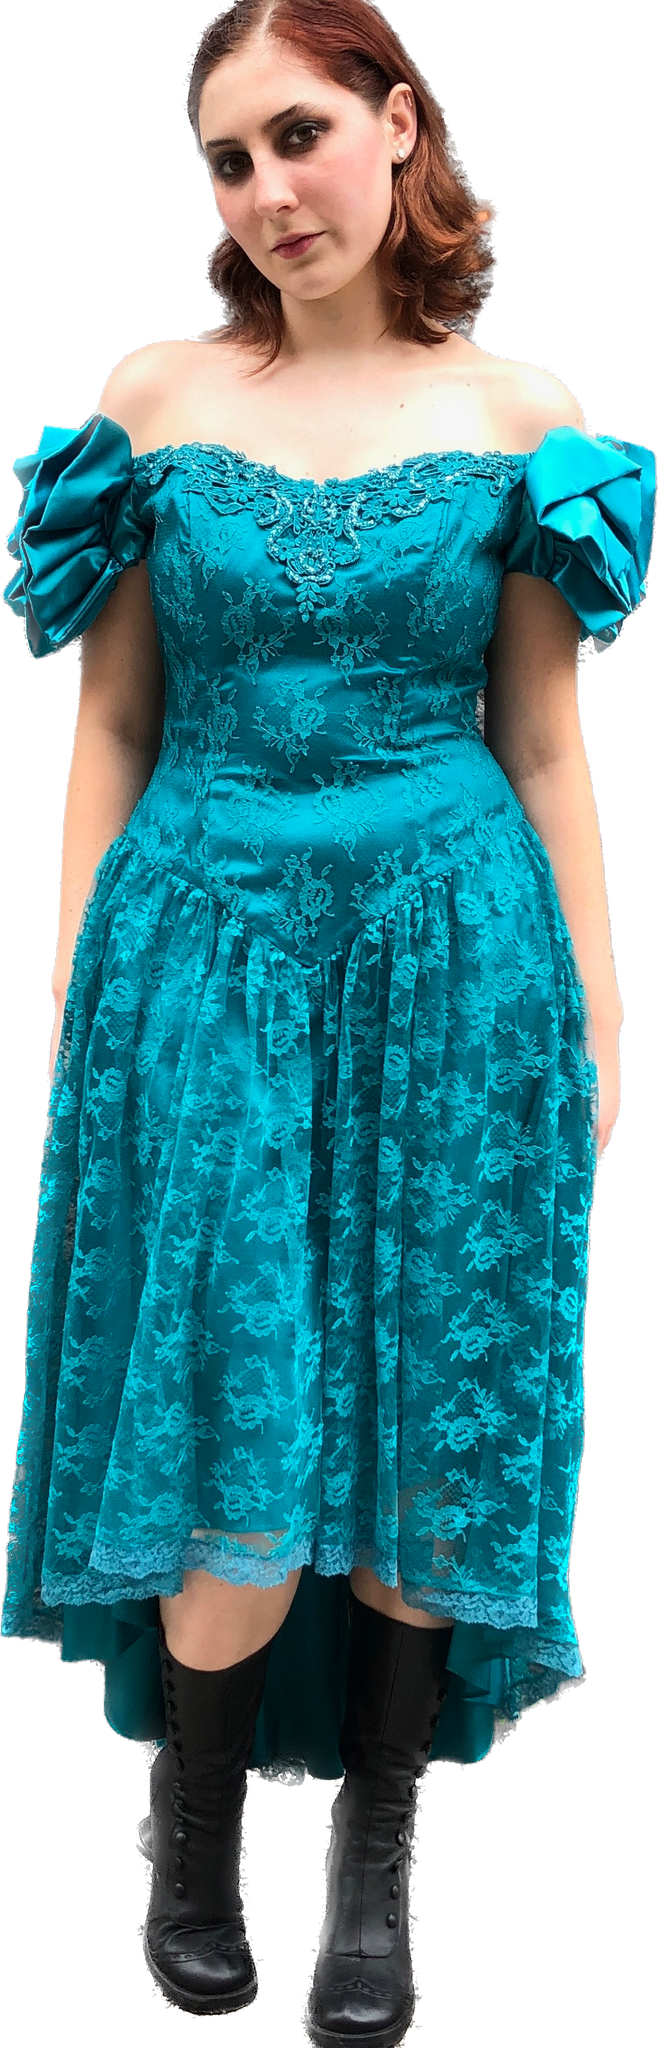 USA Maurices Teal Lace HiLo Semi-Formal    w30